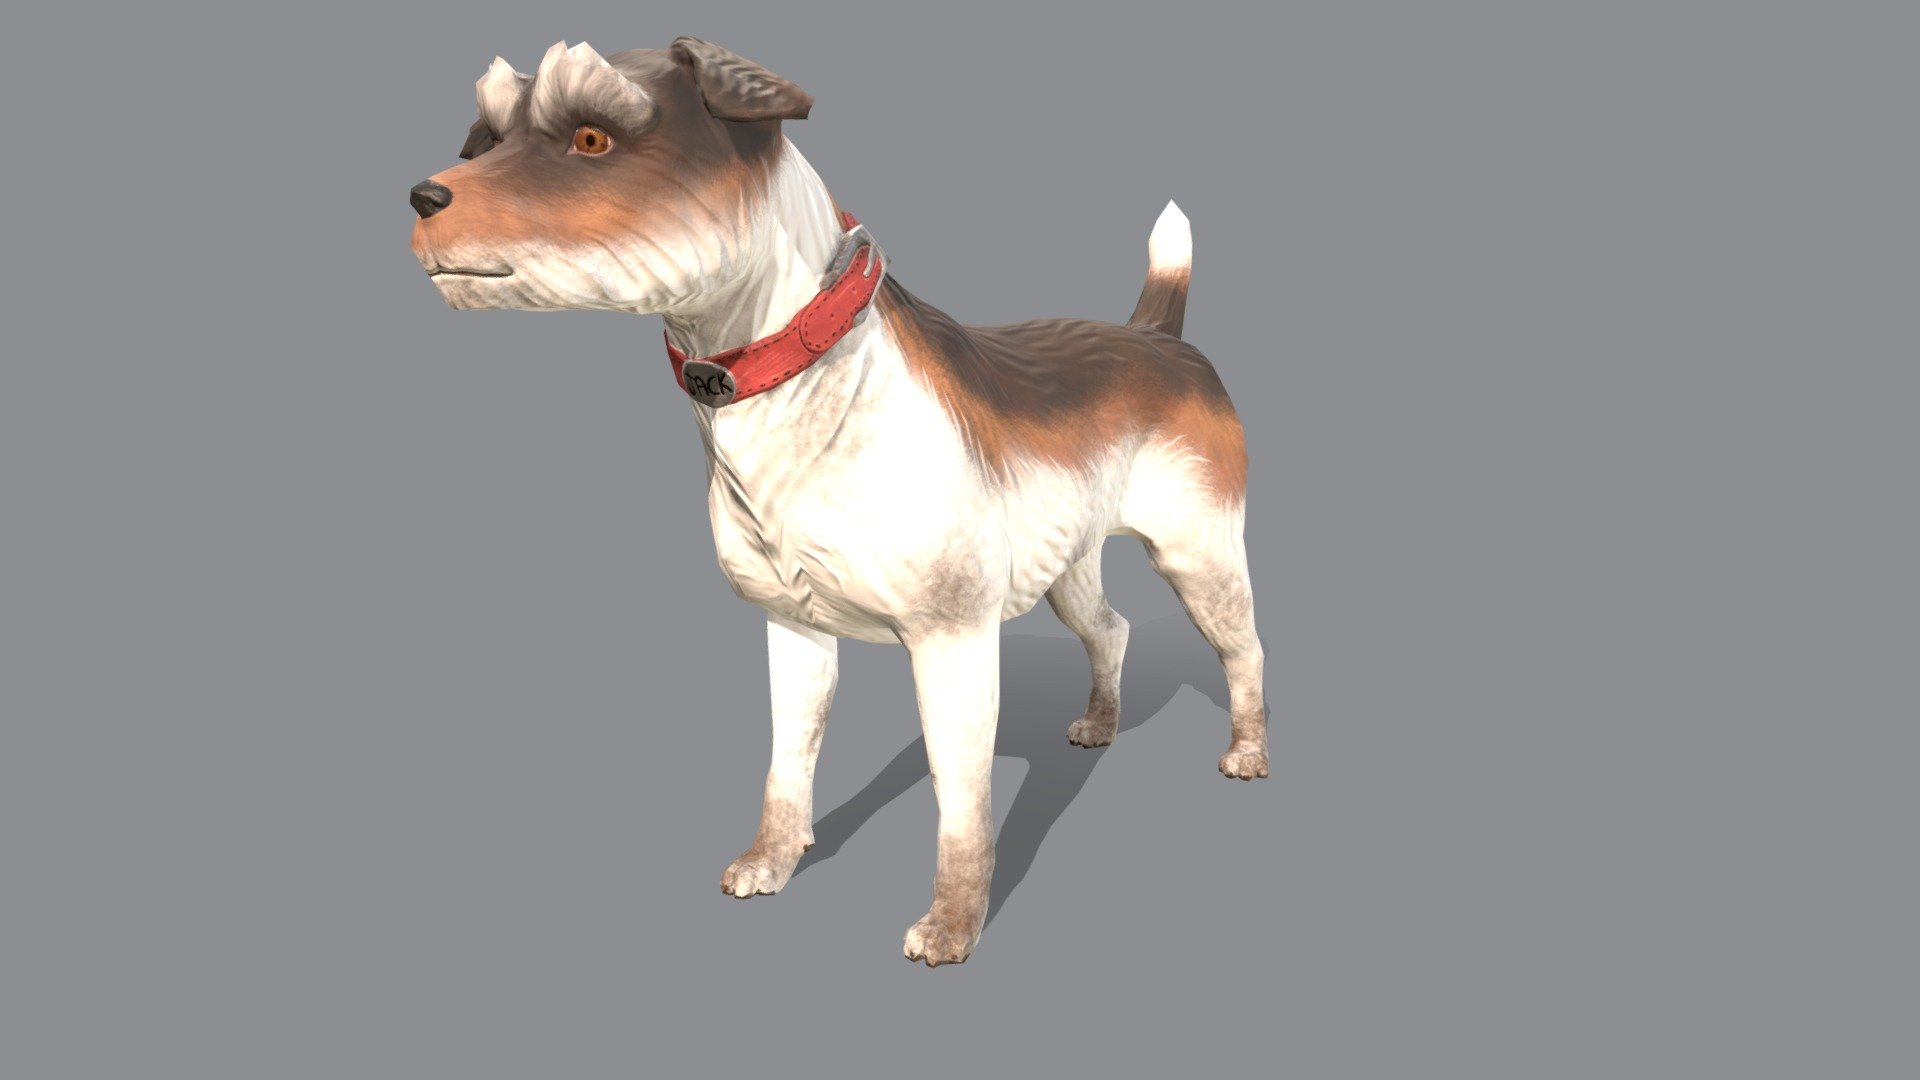 Jack was made for a game jam! 
He was rigged by my sister and she also helped me make a very quick idle animation for him, for a model made in a few days I'd say he is alright - Jack the Jack Russel - 3D model by abimerrell 3d model